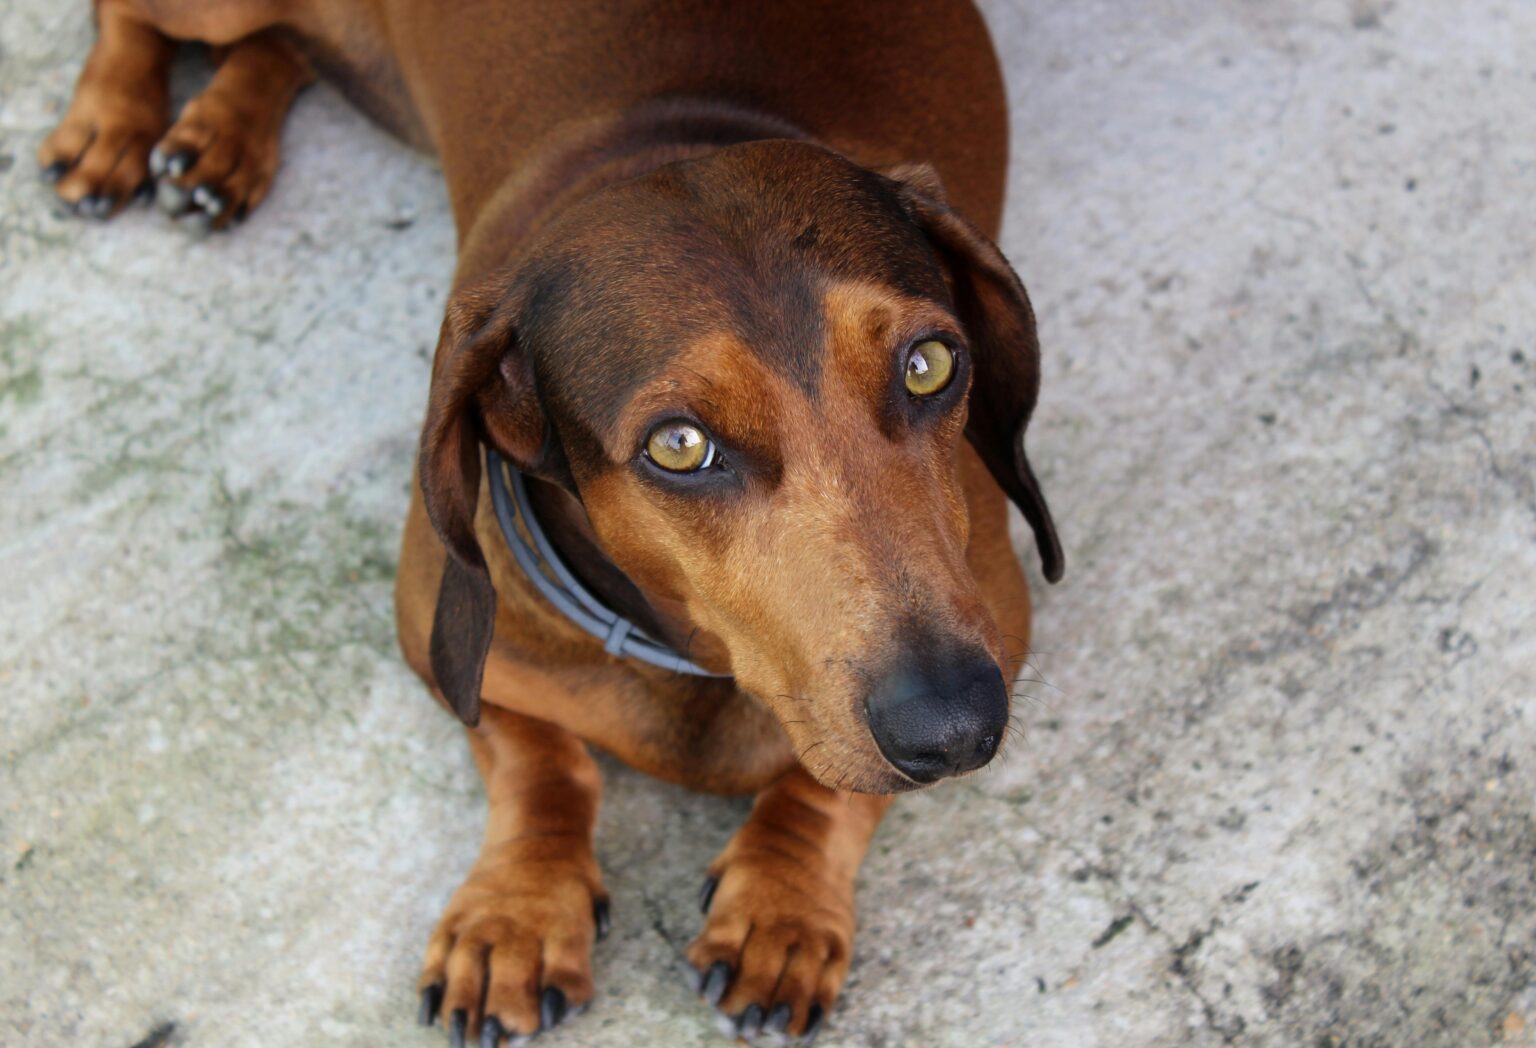 Do dachshunds have separation anxiety?